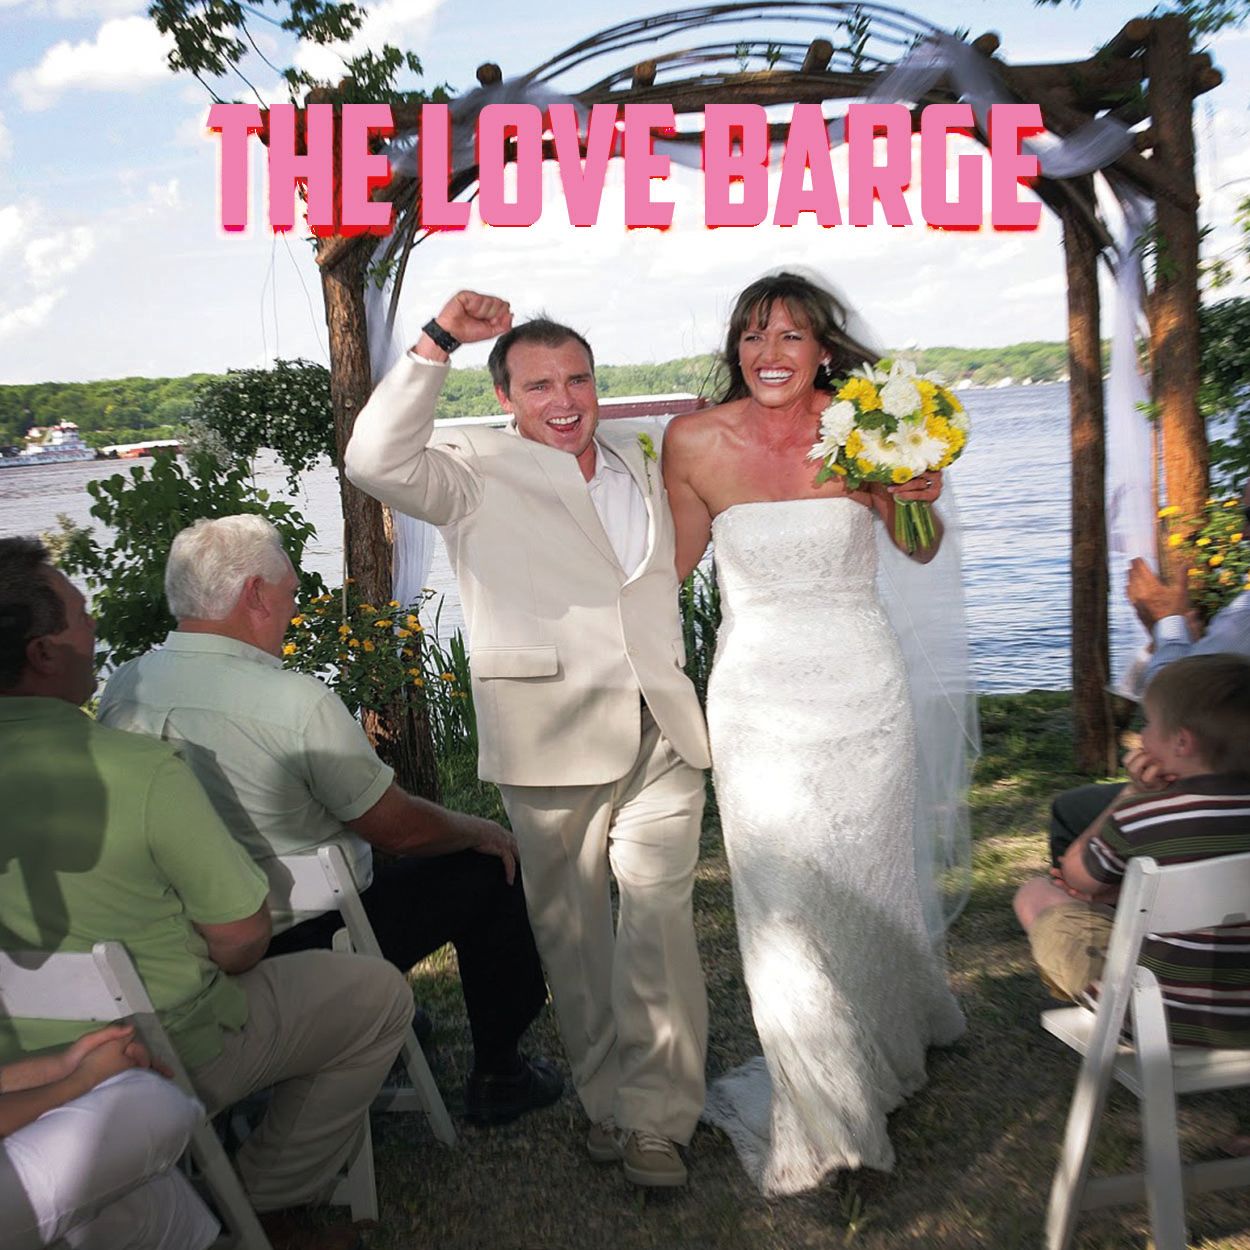 The Love Barge